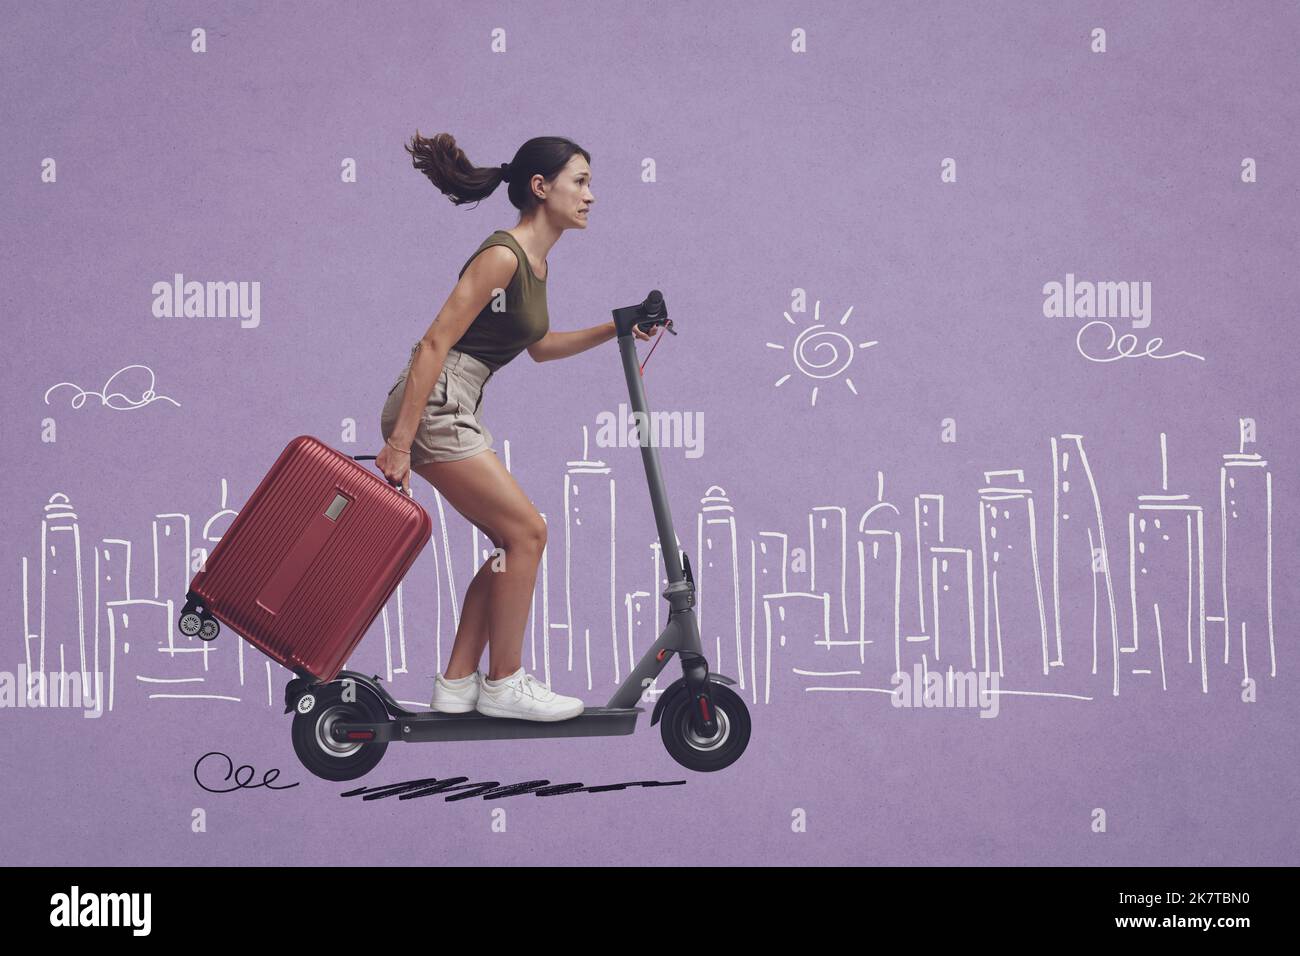 Young traveller woman carrying a suitcase and riding an electric scooter, sketched cityscape in the background, smart mobility concept Stock Photo